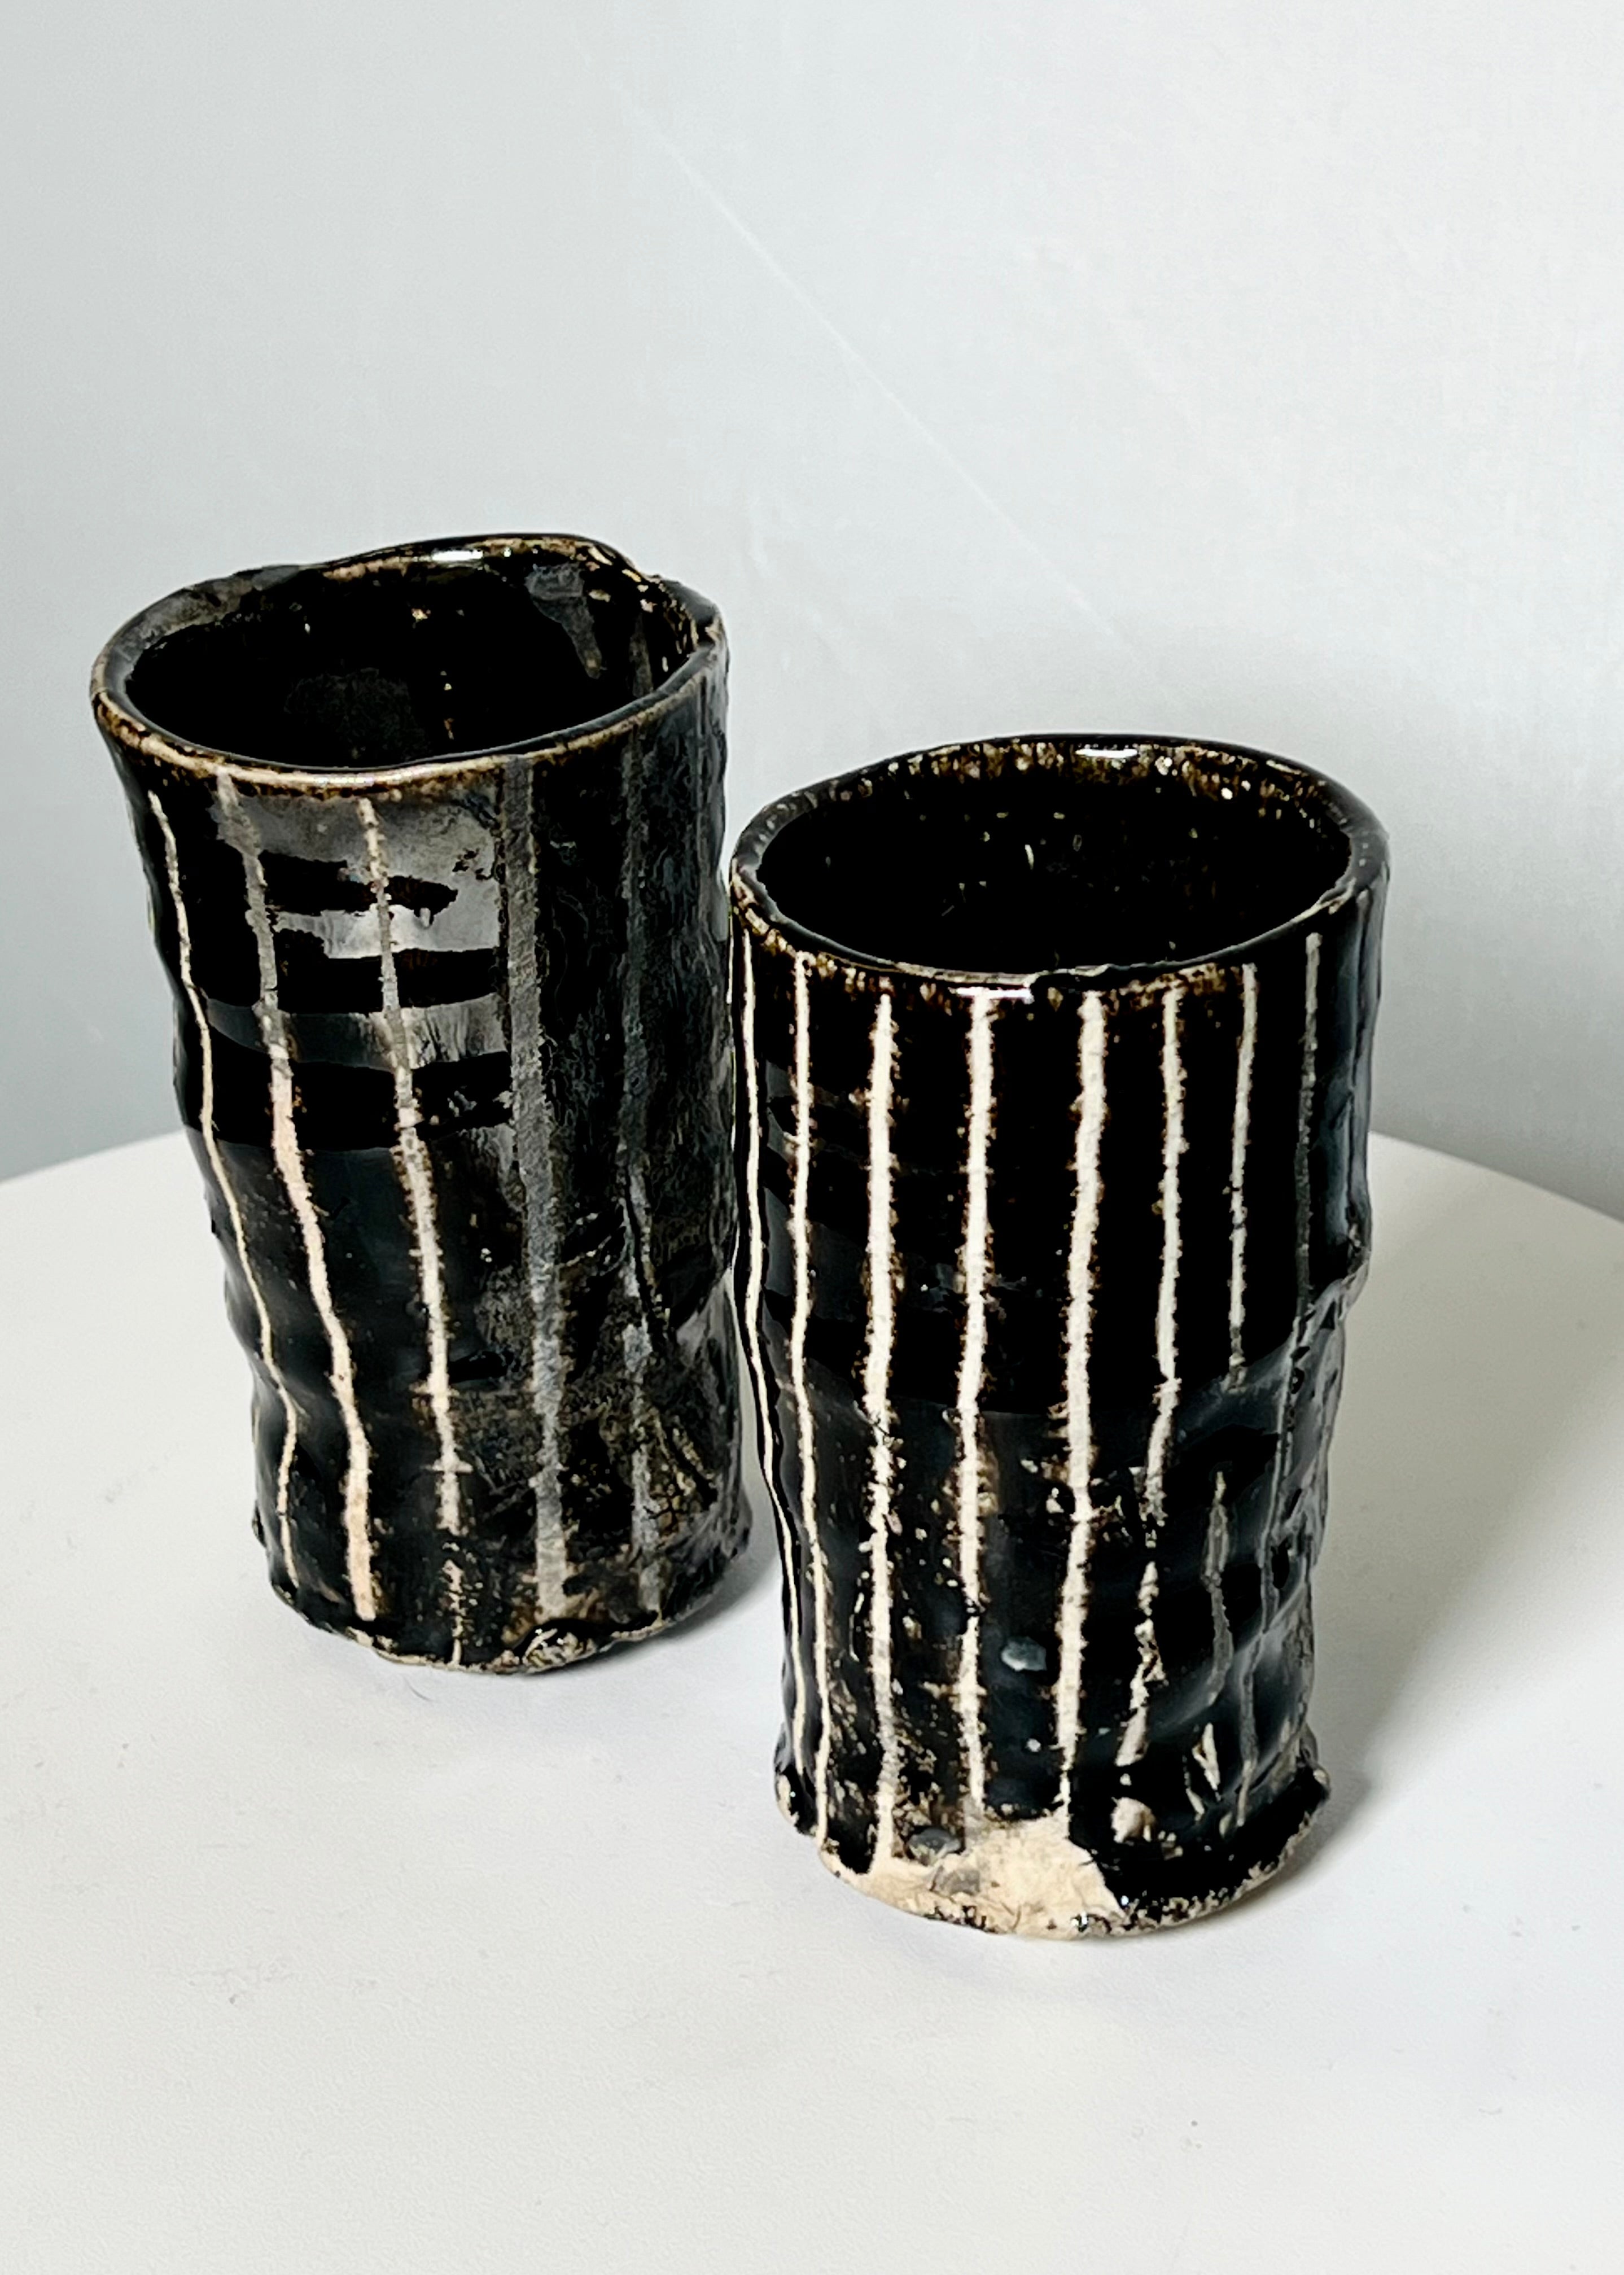 Pair of Black/White Striped Studio Pottery Cups (Vintage)